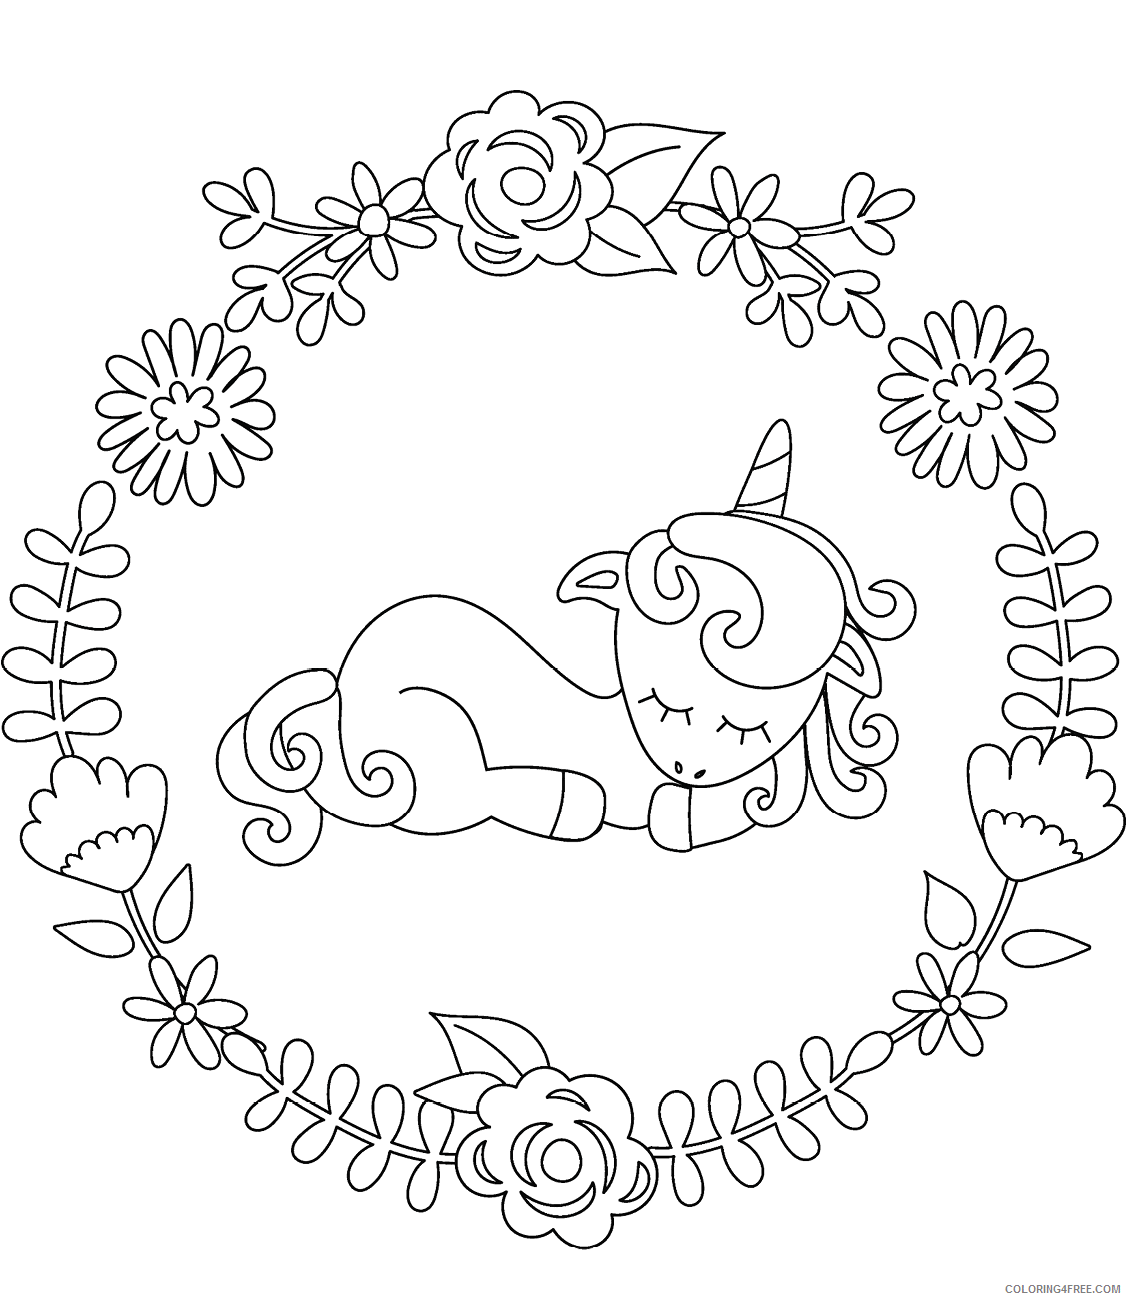 Unicorn Coloring Pages baby_unicorn_sleeping Printable 2021 6020 Coloring4free